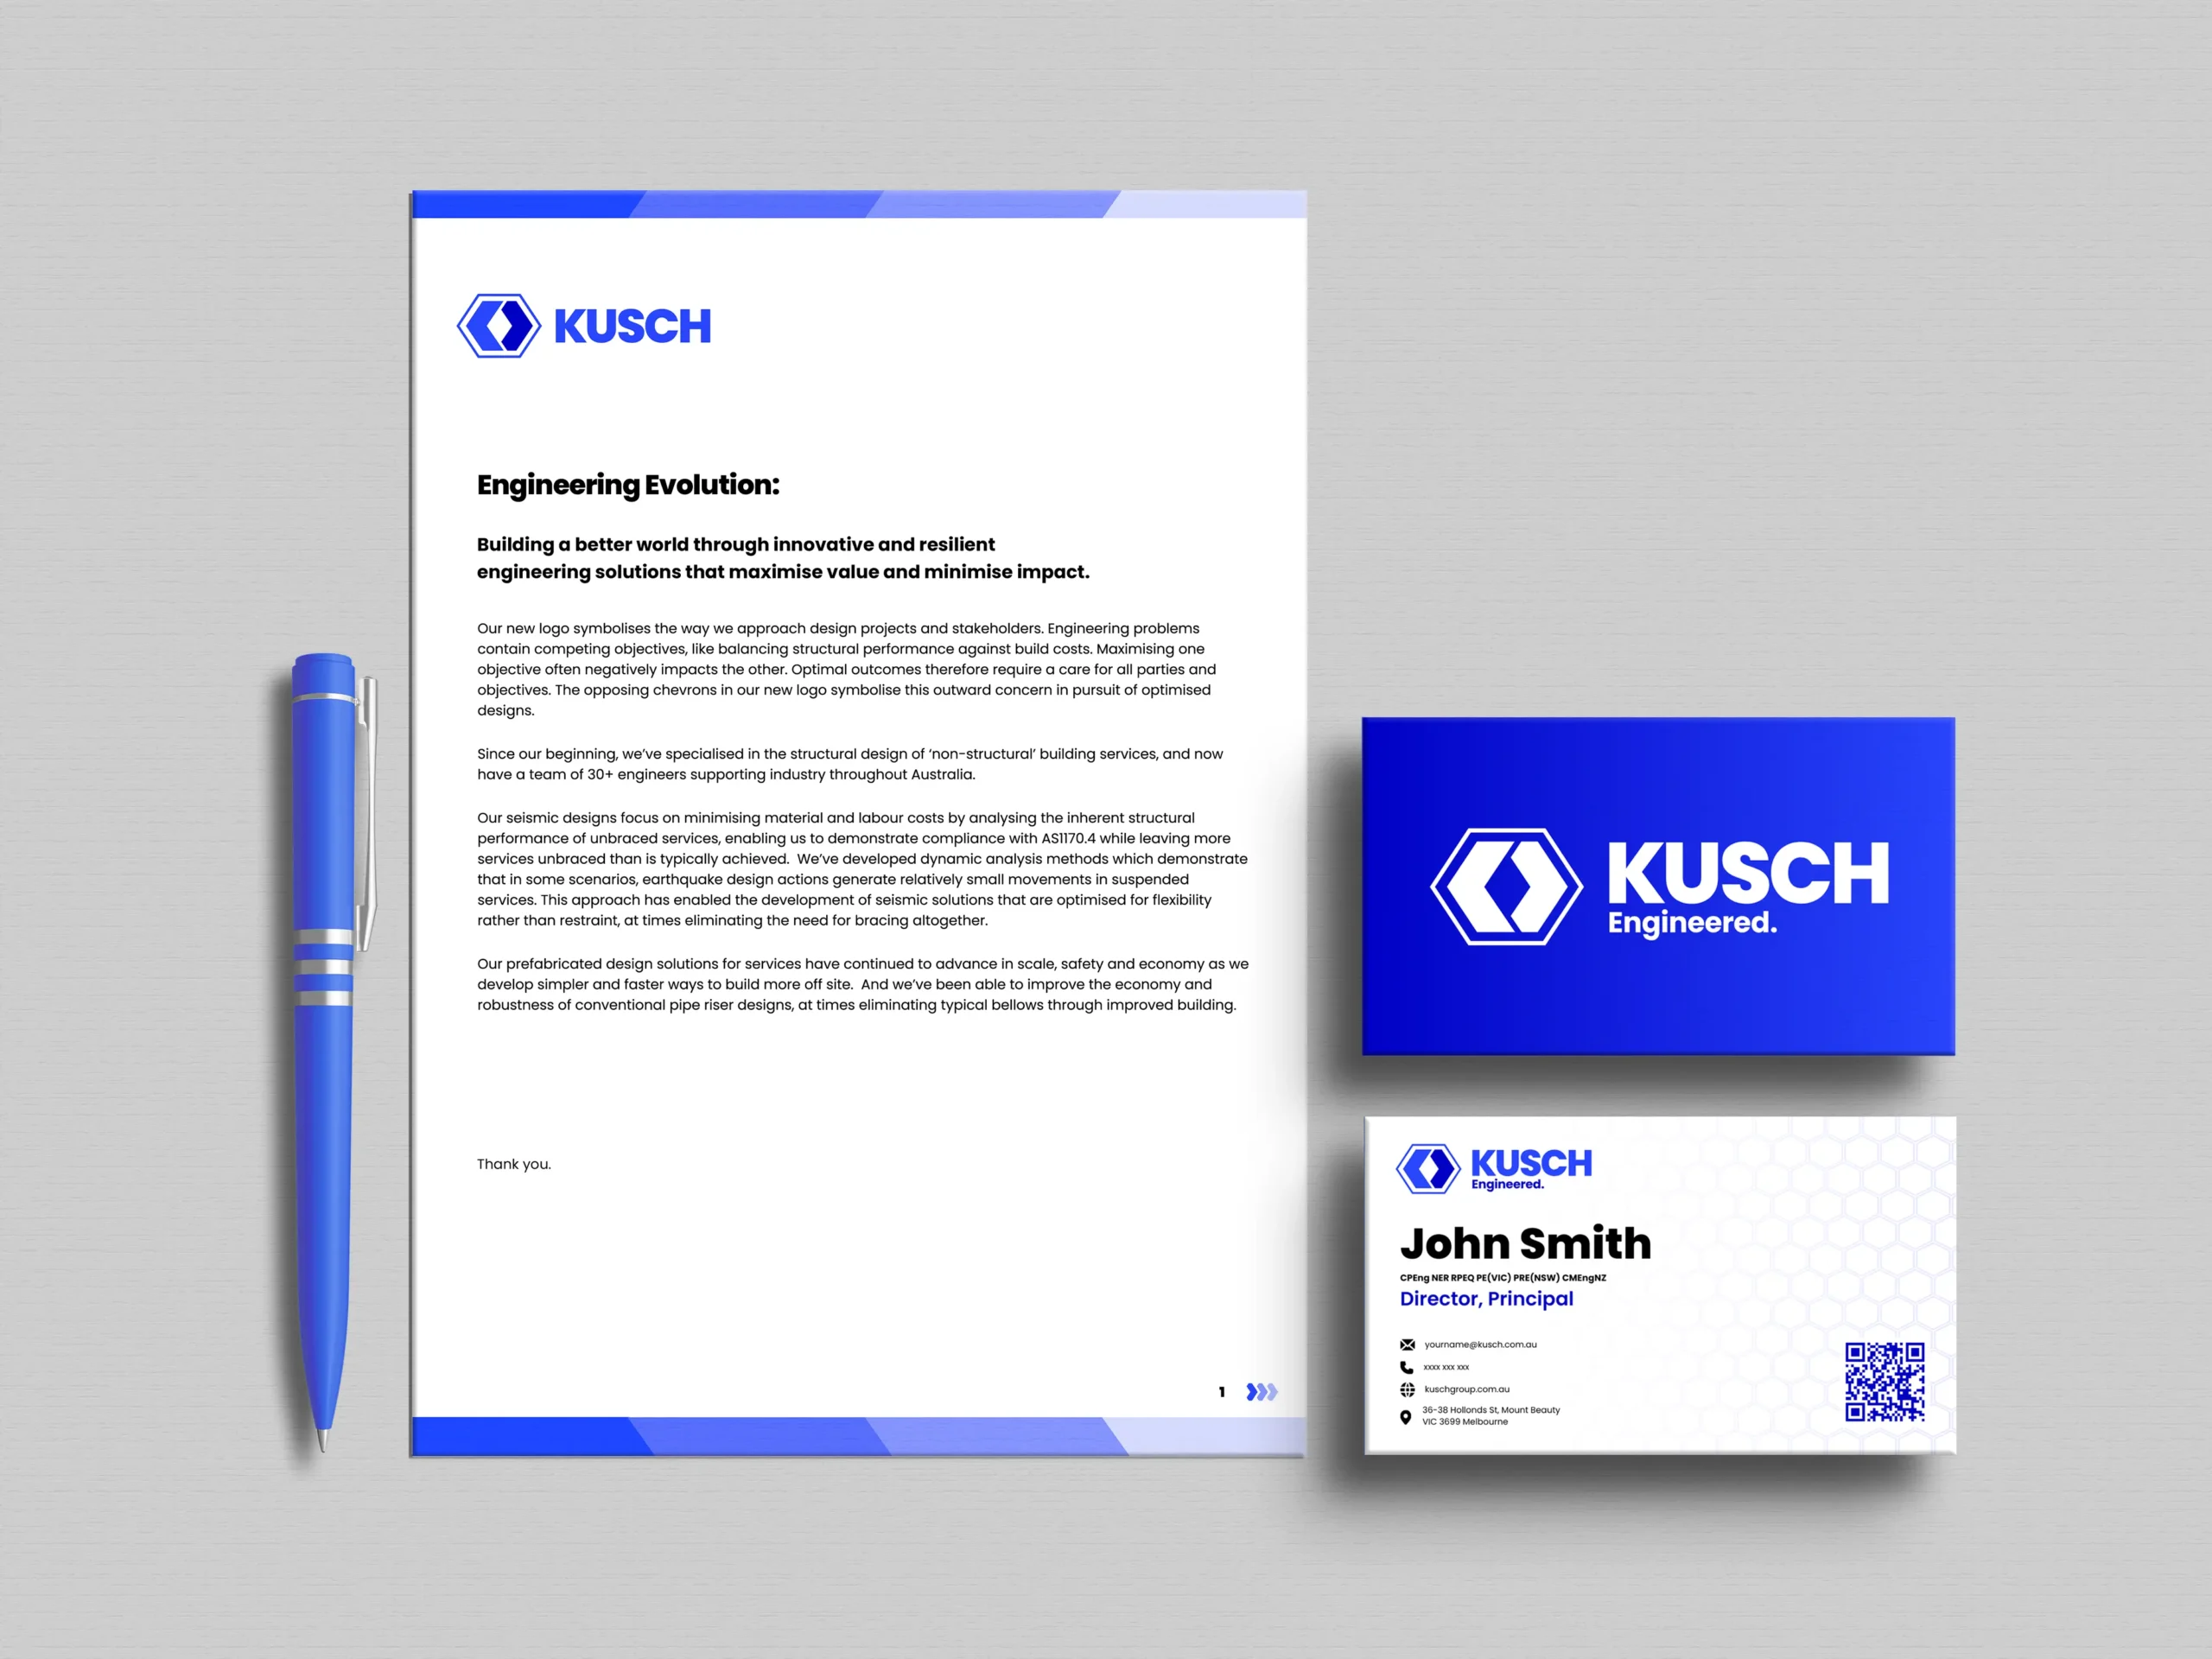 A mockup of Kusch branded stationery items arranged neatly on a wooden surface. The set includes a closed notebook with the Kusch logo prominently displayed, a business card with contact details, an envelope, a letterhead, and a pen. The design features a minimalist aesthetic with a clean, modern font and a monochromatic color scheme. The overall presentation highlights professionalism and cohesive branding for Kusch.